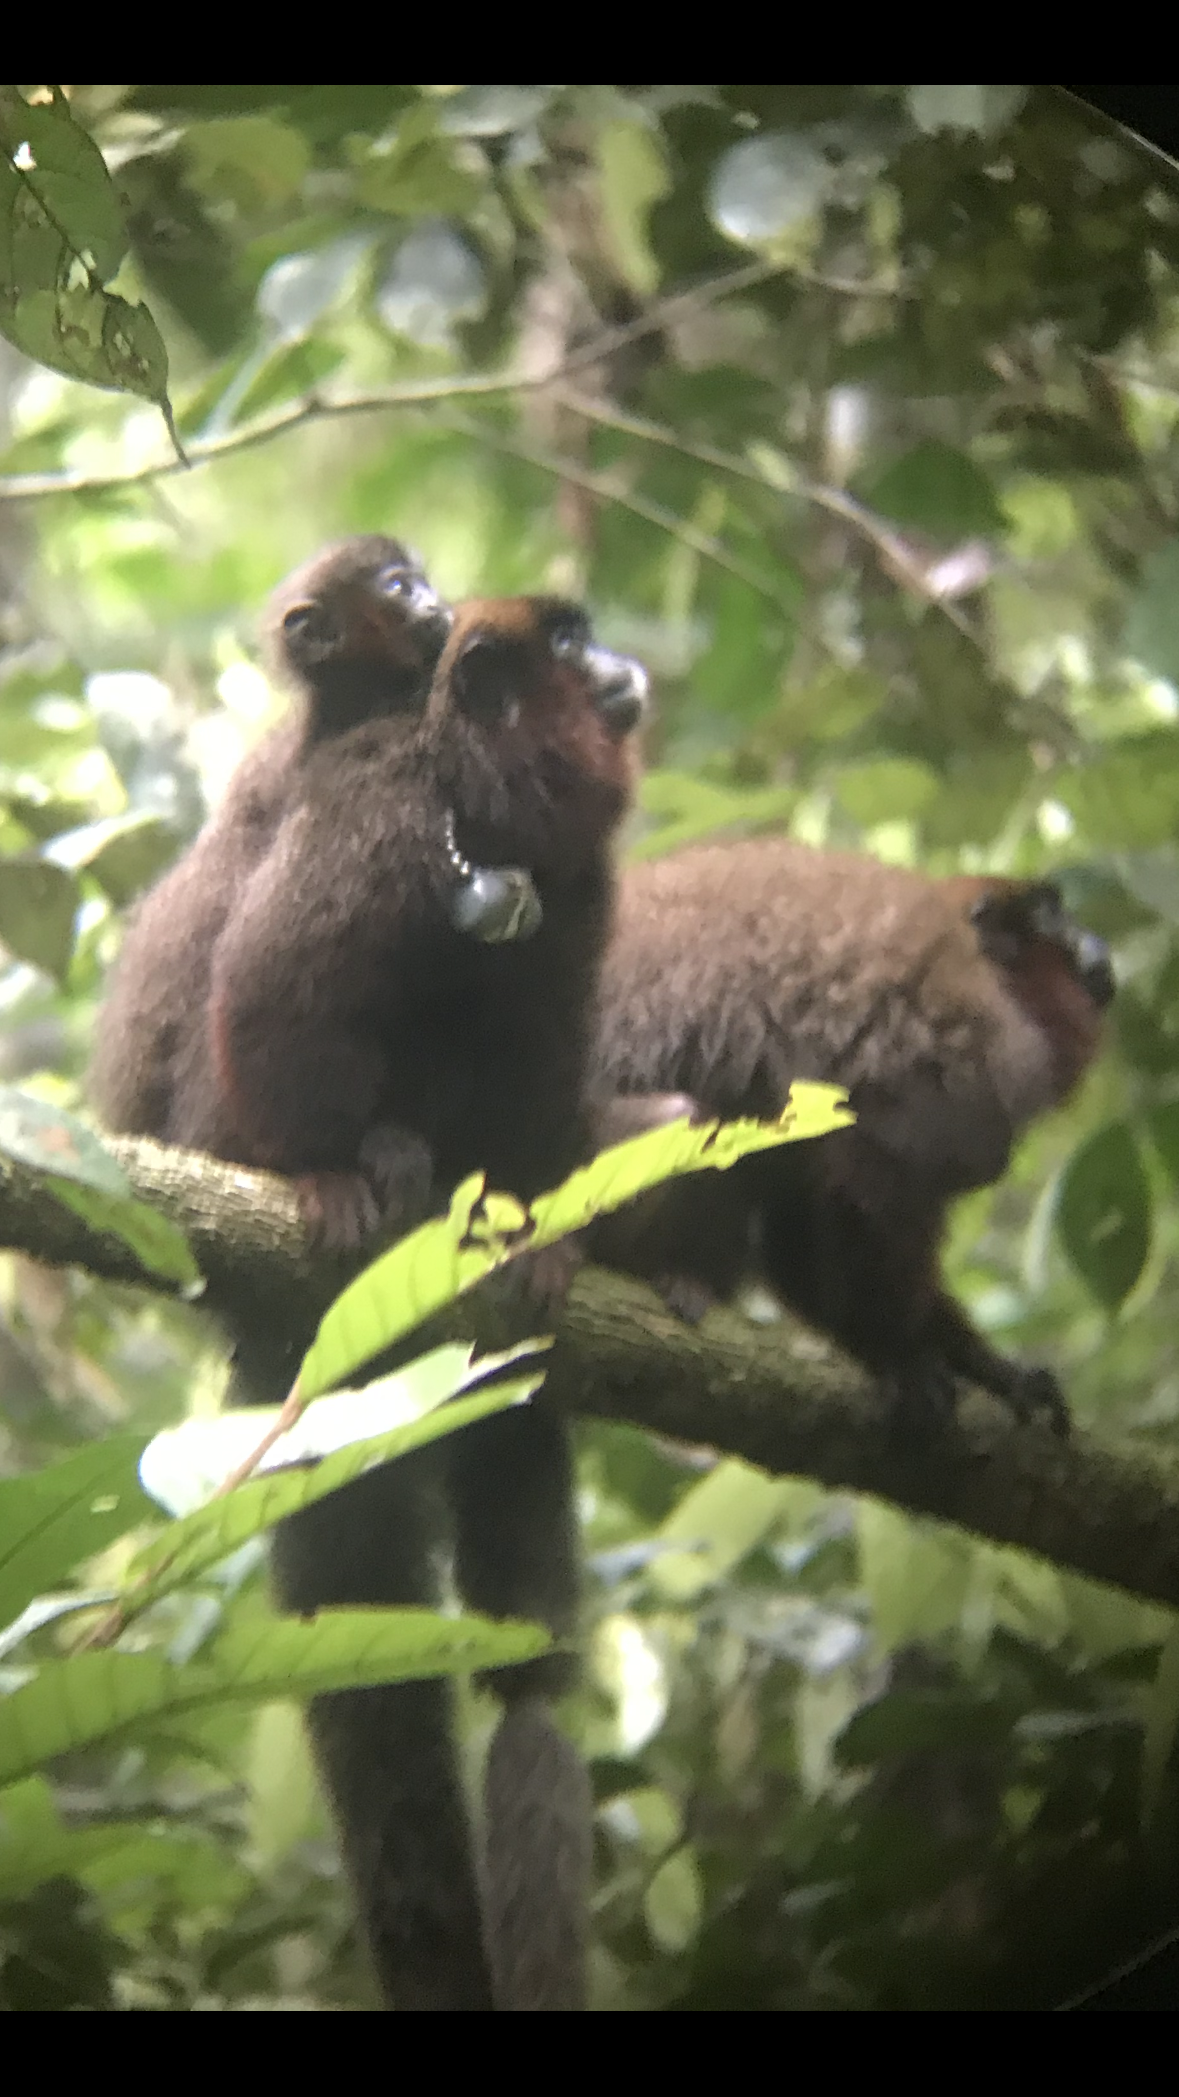 Image shows a family group of titi monkeys, perched on a branch in the tree canopy.